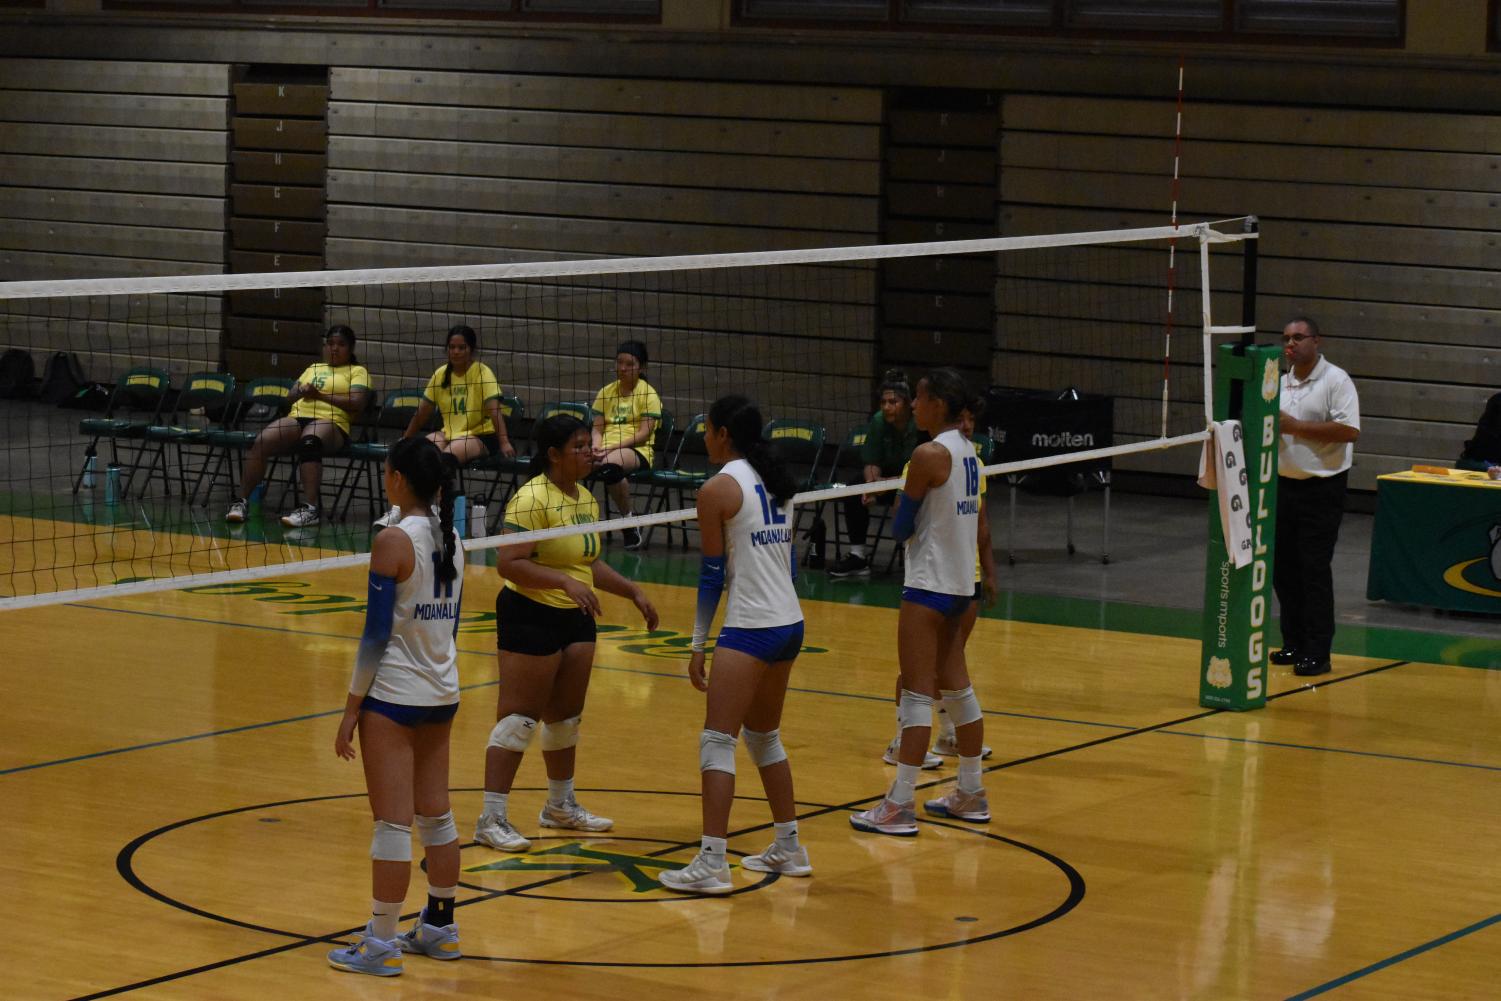 Ryson+Lum+charges+after+a+Leilehua+player+at+the+Sept.+9+Homecoming+game.+Moanalua+is+ranked+tenth+in+the+state.